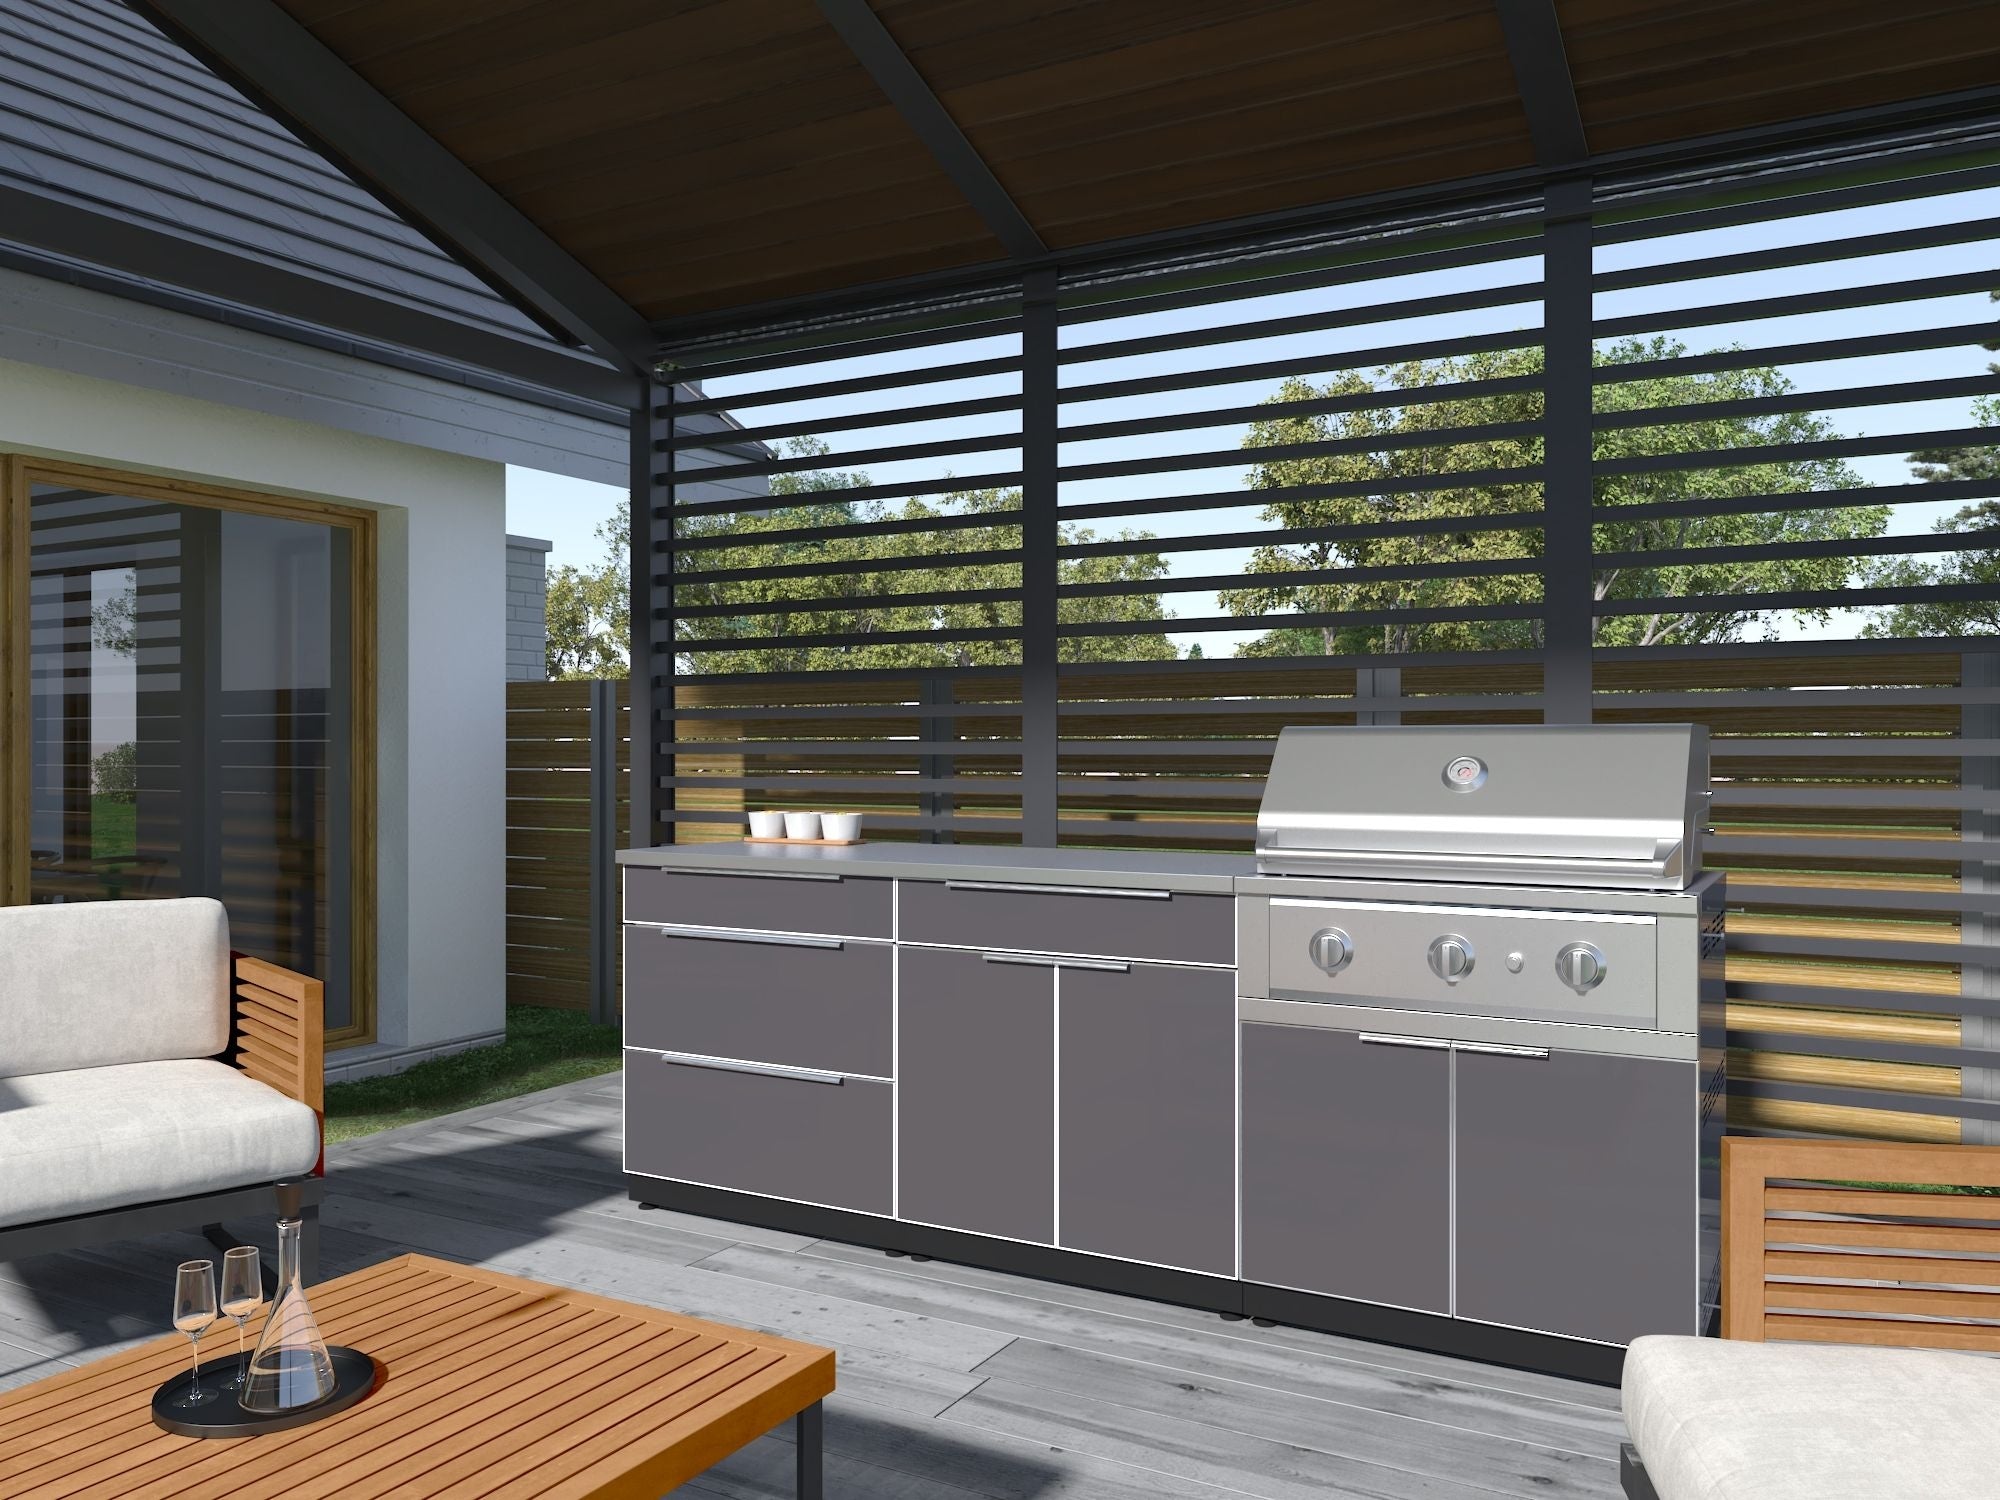 Outdoor Kitchen Aluminum 7 Piece Cabinet Set with 2 Door, Bar, Corner, Grill Cabinet, Performance Grill, and Countertops